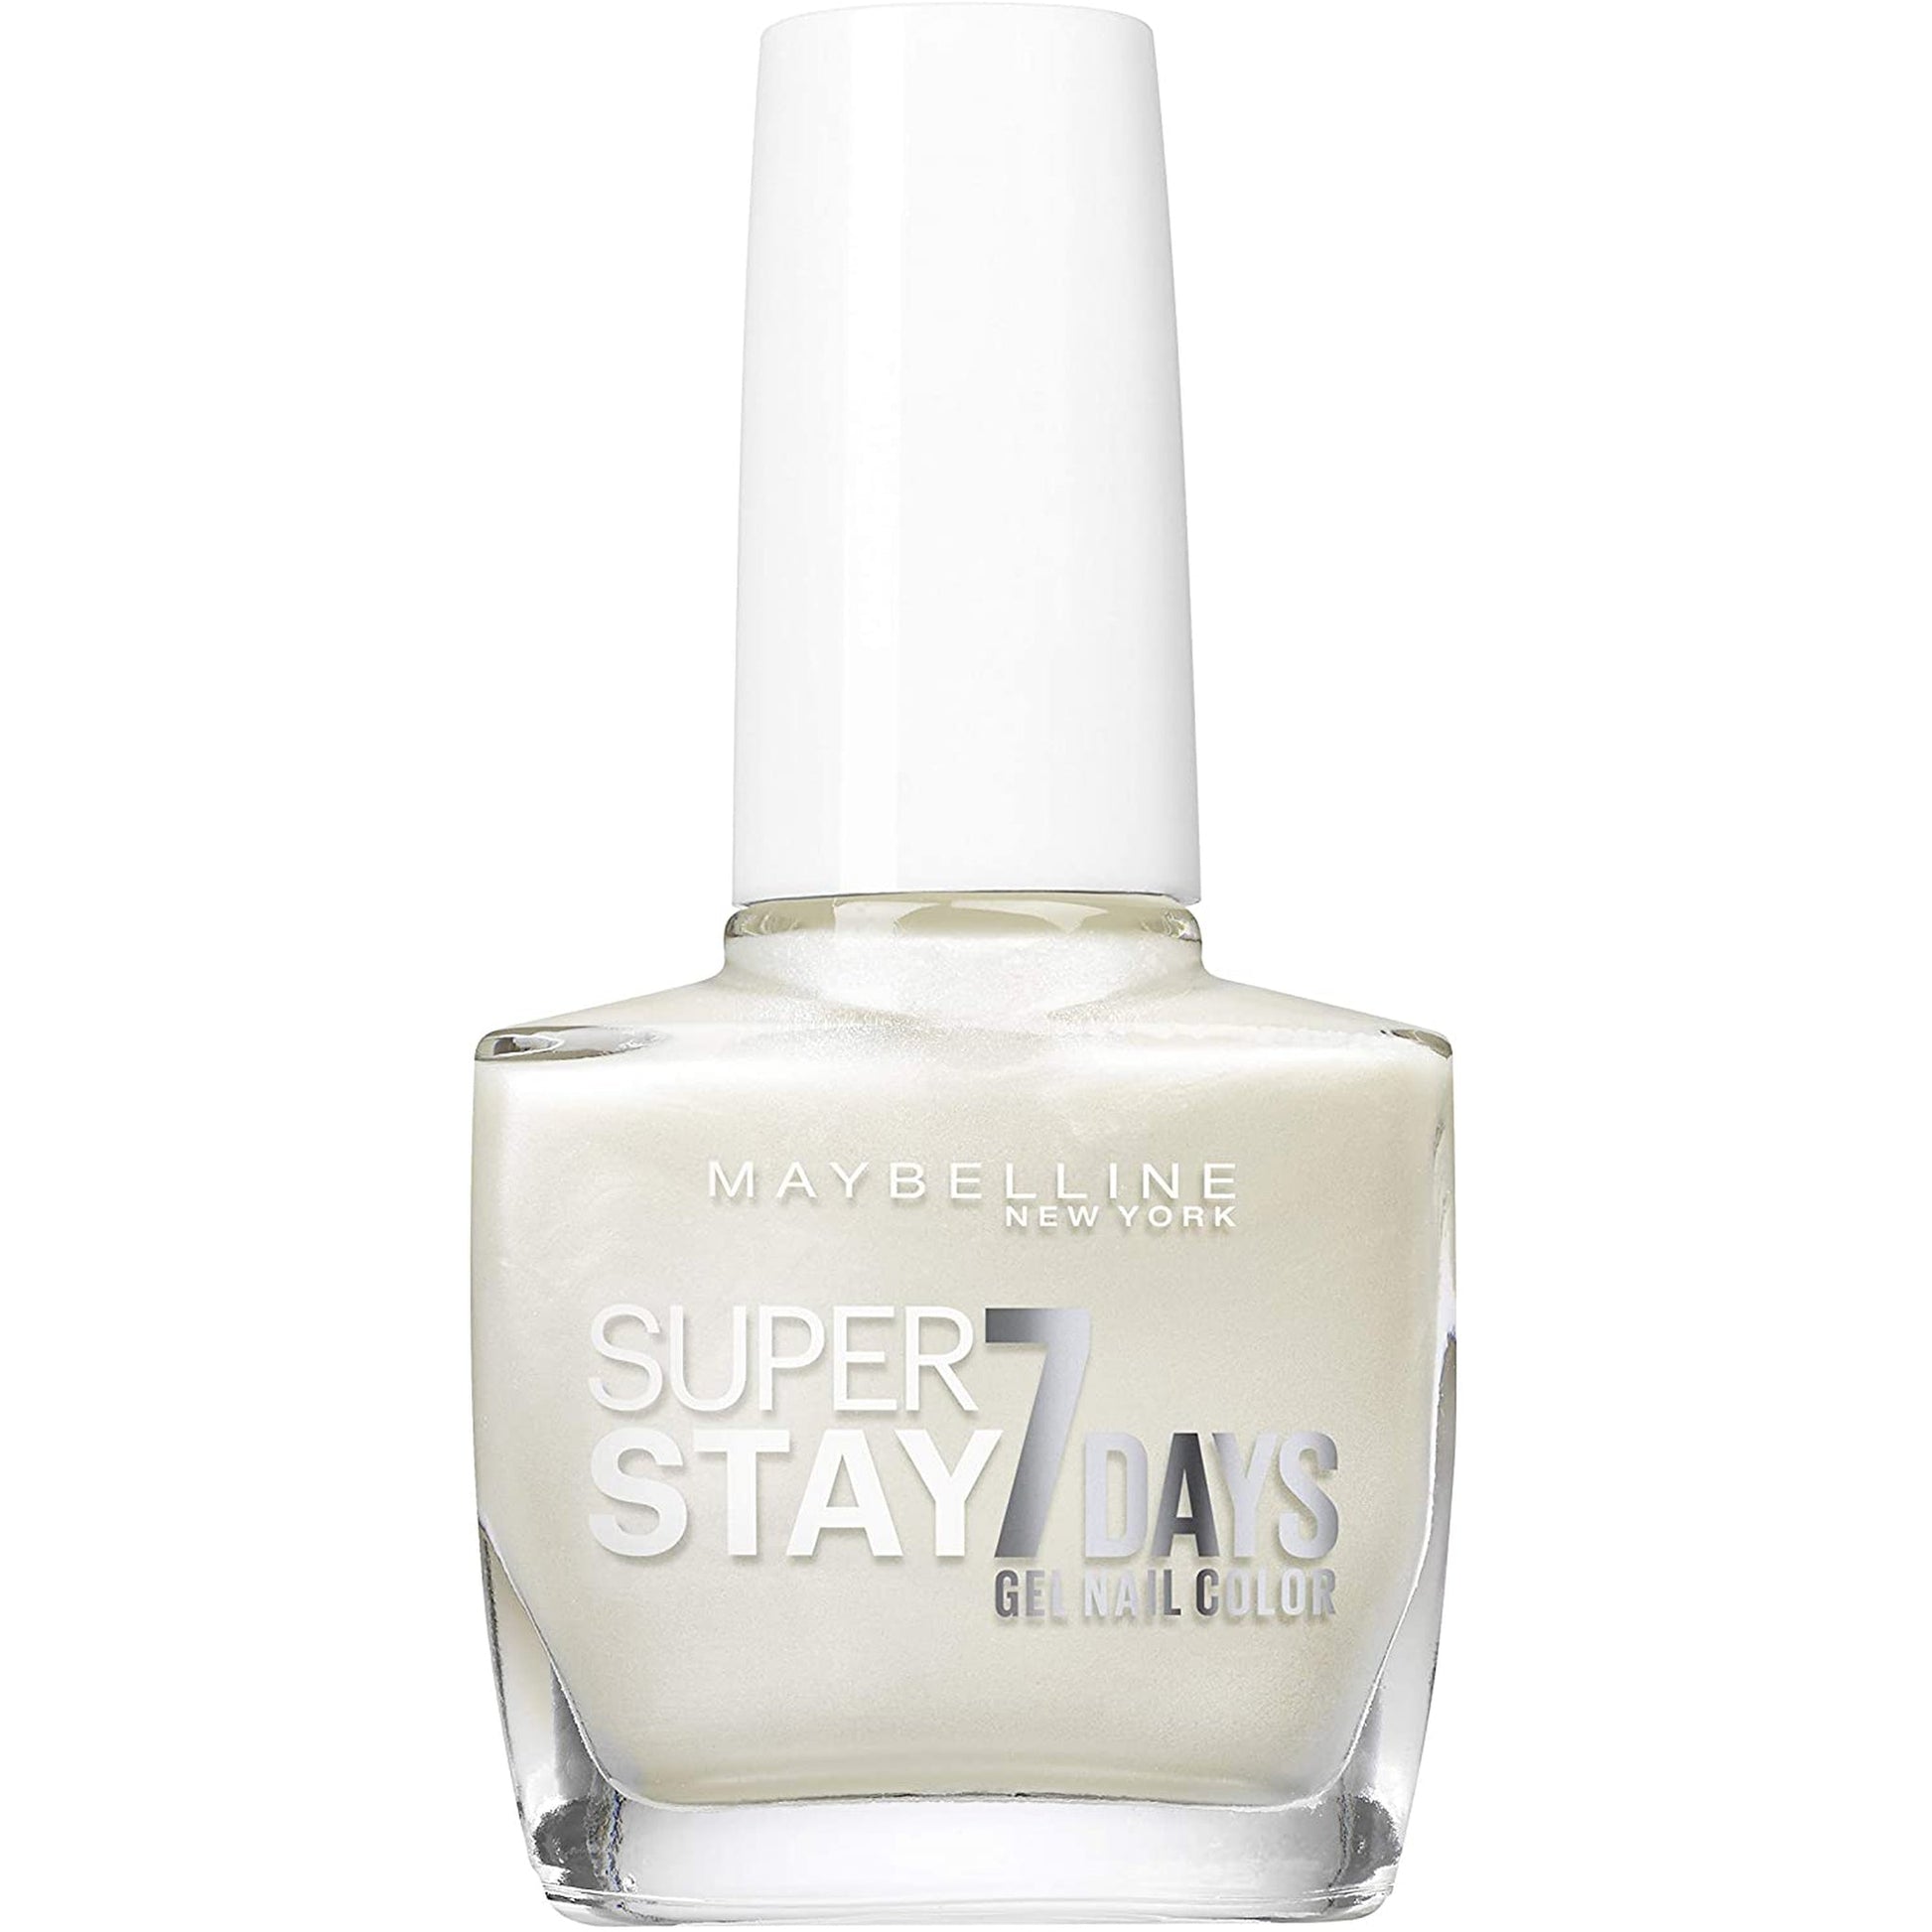 Maybelline Super Stay 7 Days Gel Nail Polish 77 Pearly White-Maybelline-BeautyNmakeup.co.uk